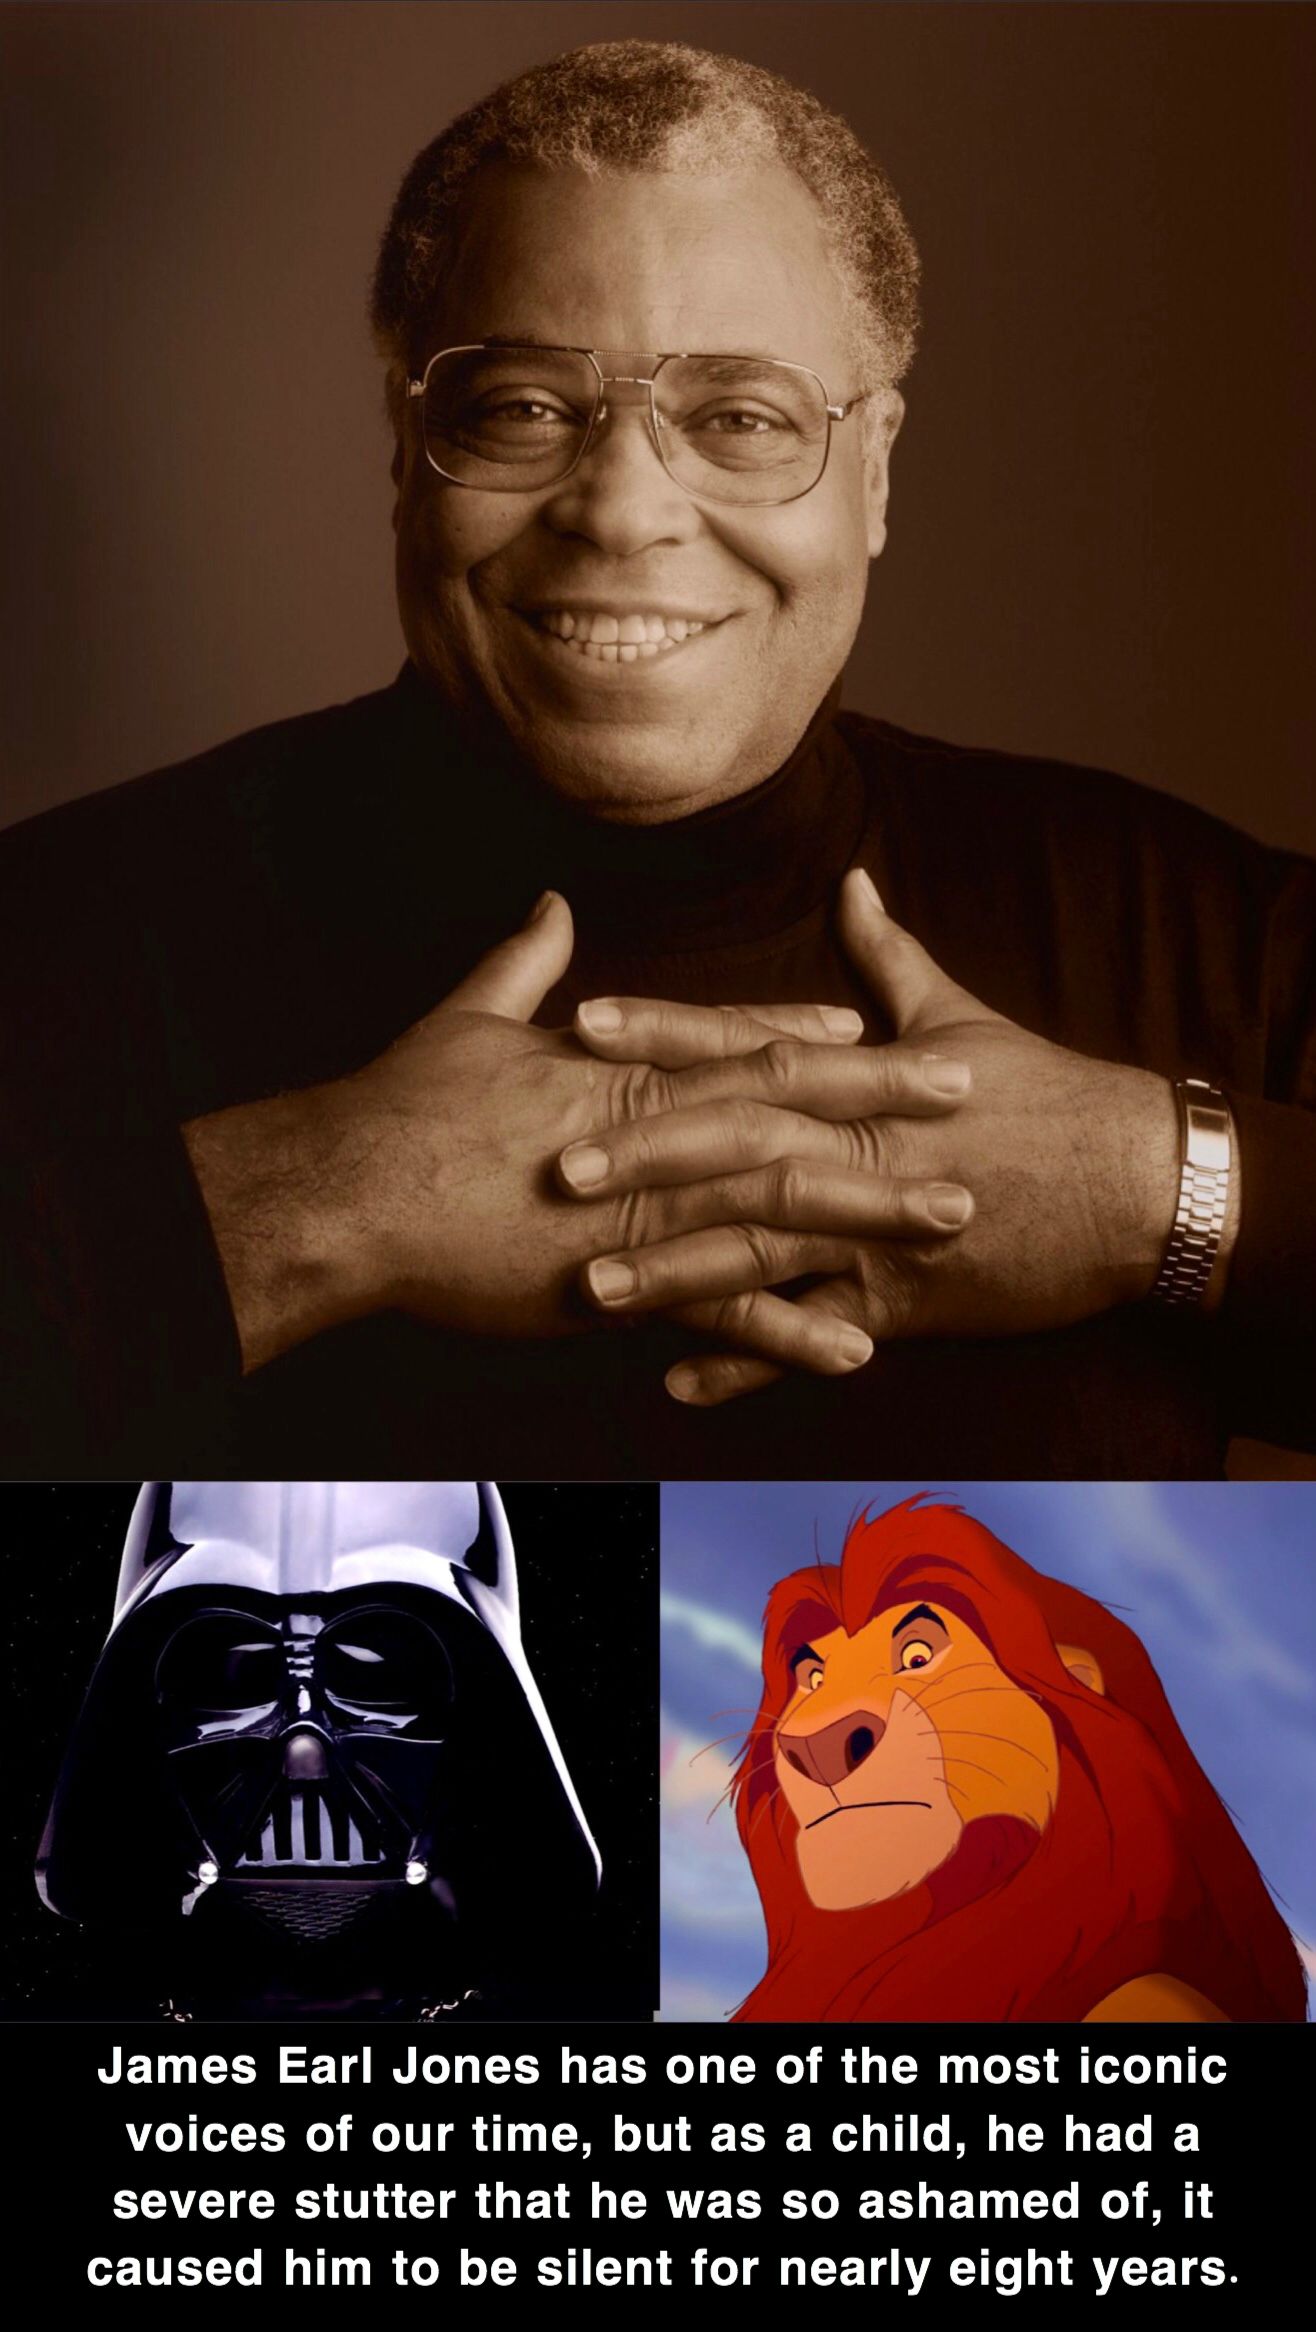 human behavior - James Earl Jones has one of the most iconic voices of our time, but as a child, he had a severe stutter that he was so ashamed of, it caused him to be silent for nearly eight years.